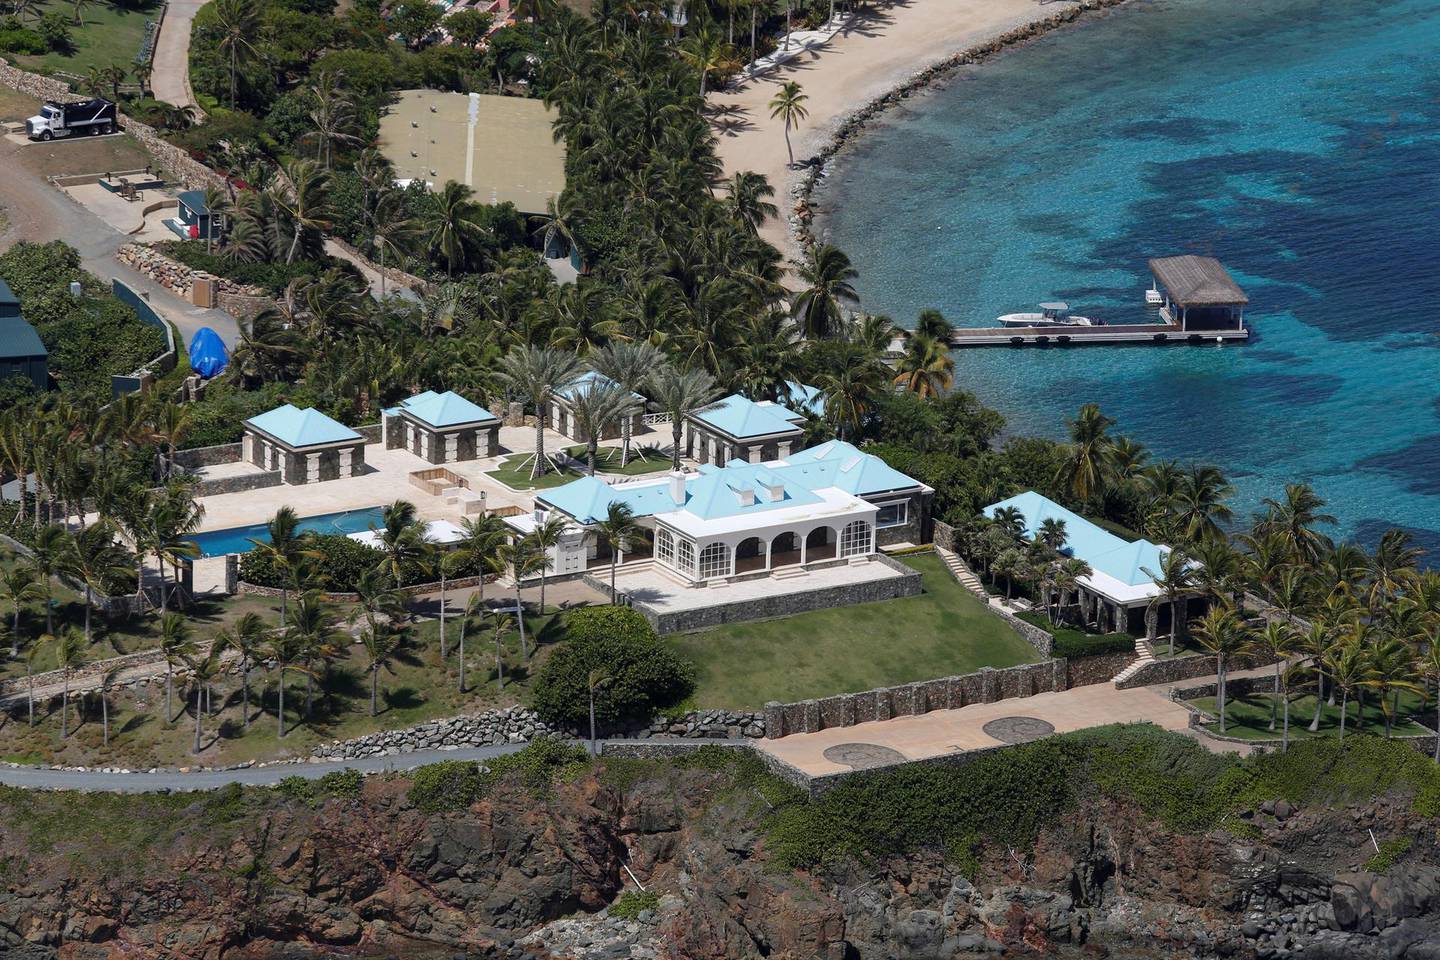 FILE PHOTO: Facilities at Little St. James Island, one of the properties of financier Jeffrey Epstein, are seen in an aerial view, near Charlotte Amalie, St. Thomas, U.S. Virgin Islands July 21, 2019. REUTERS/Marco Bello/File Photo